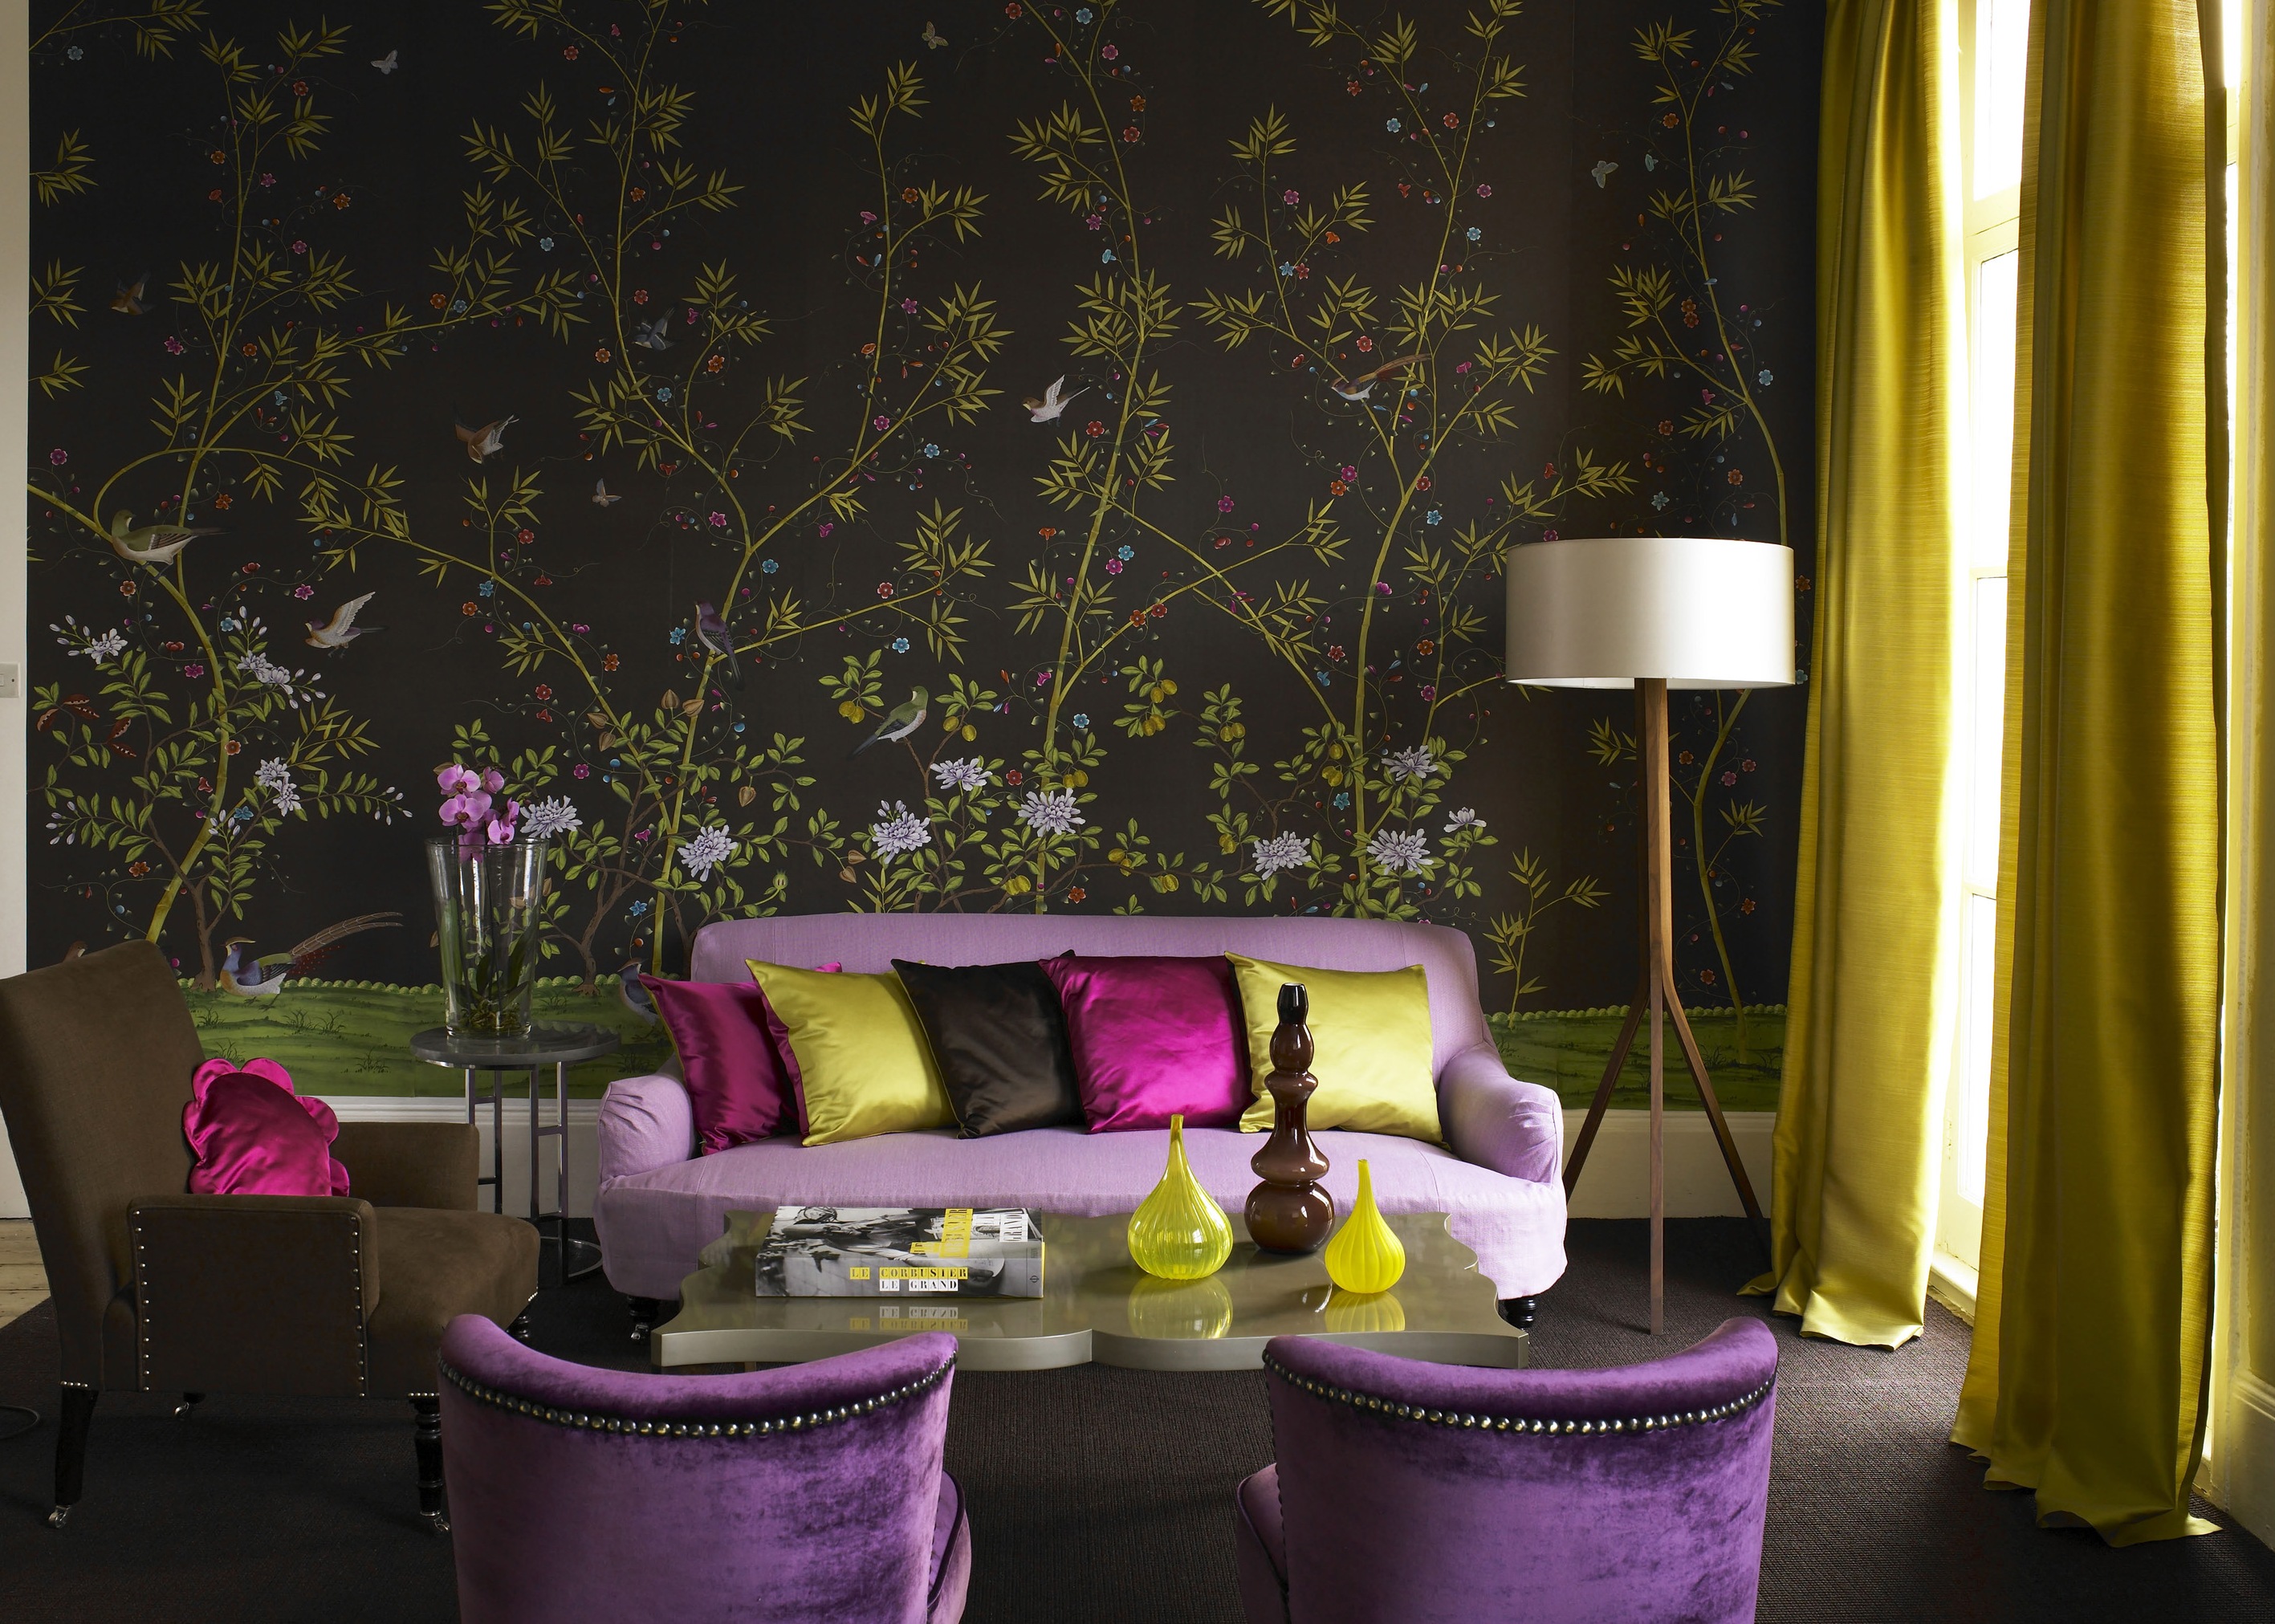  Curtain Some Ways To Decorate Your Room With New Color Of Furnitures